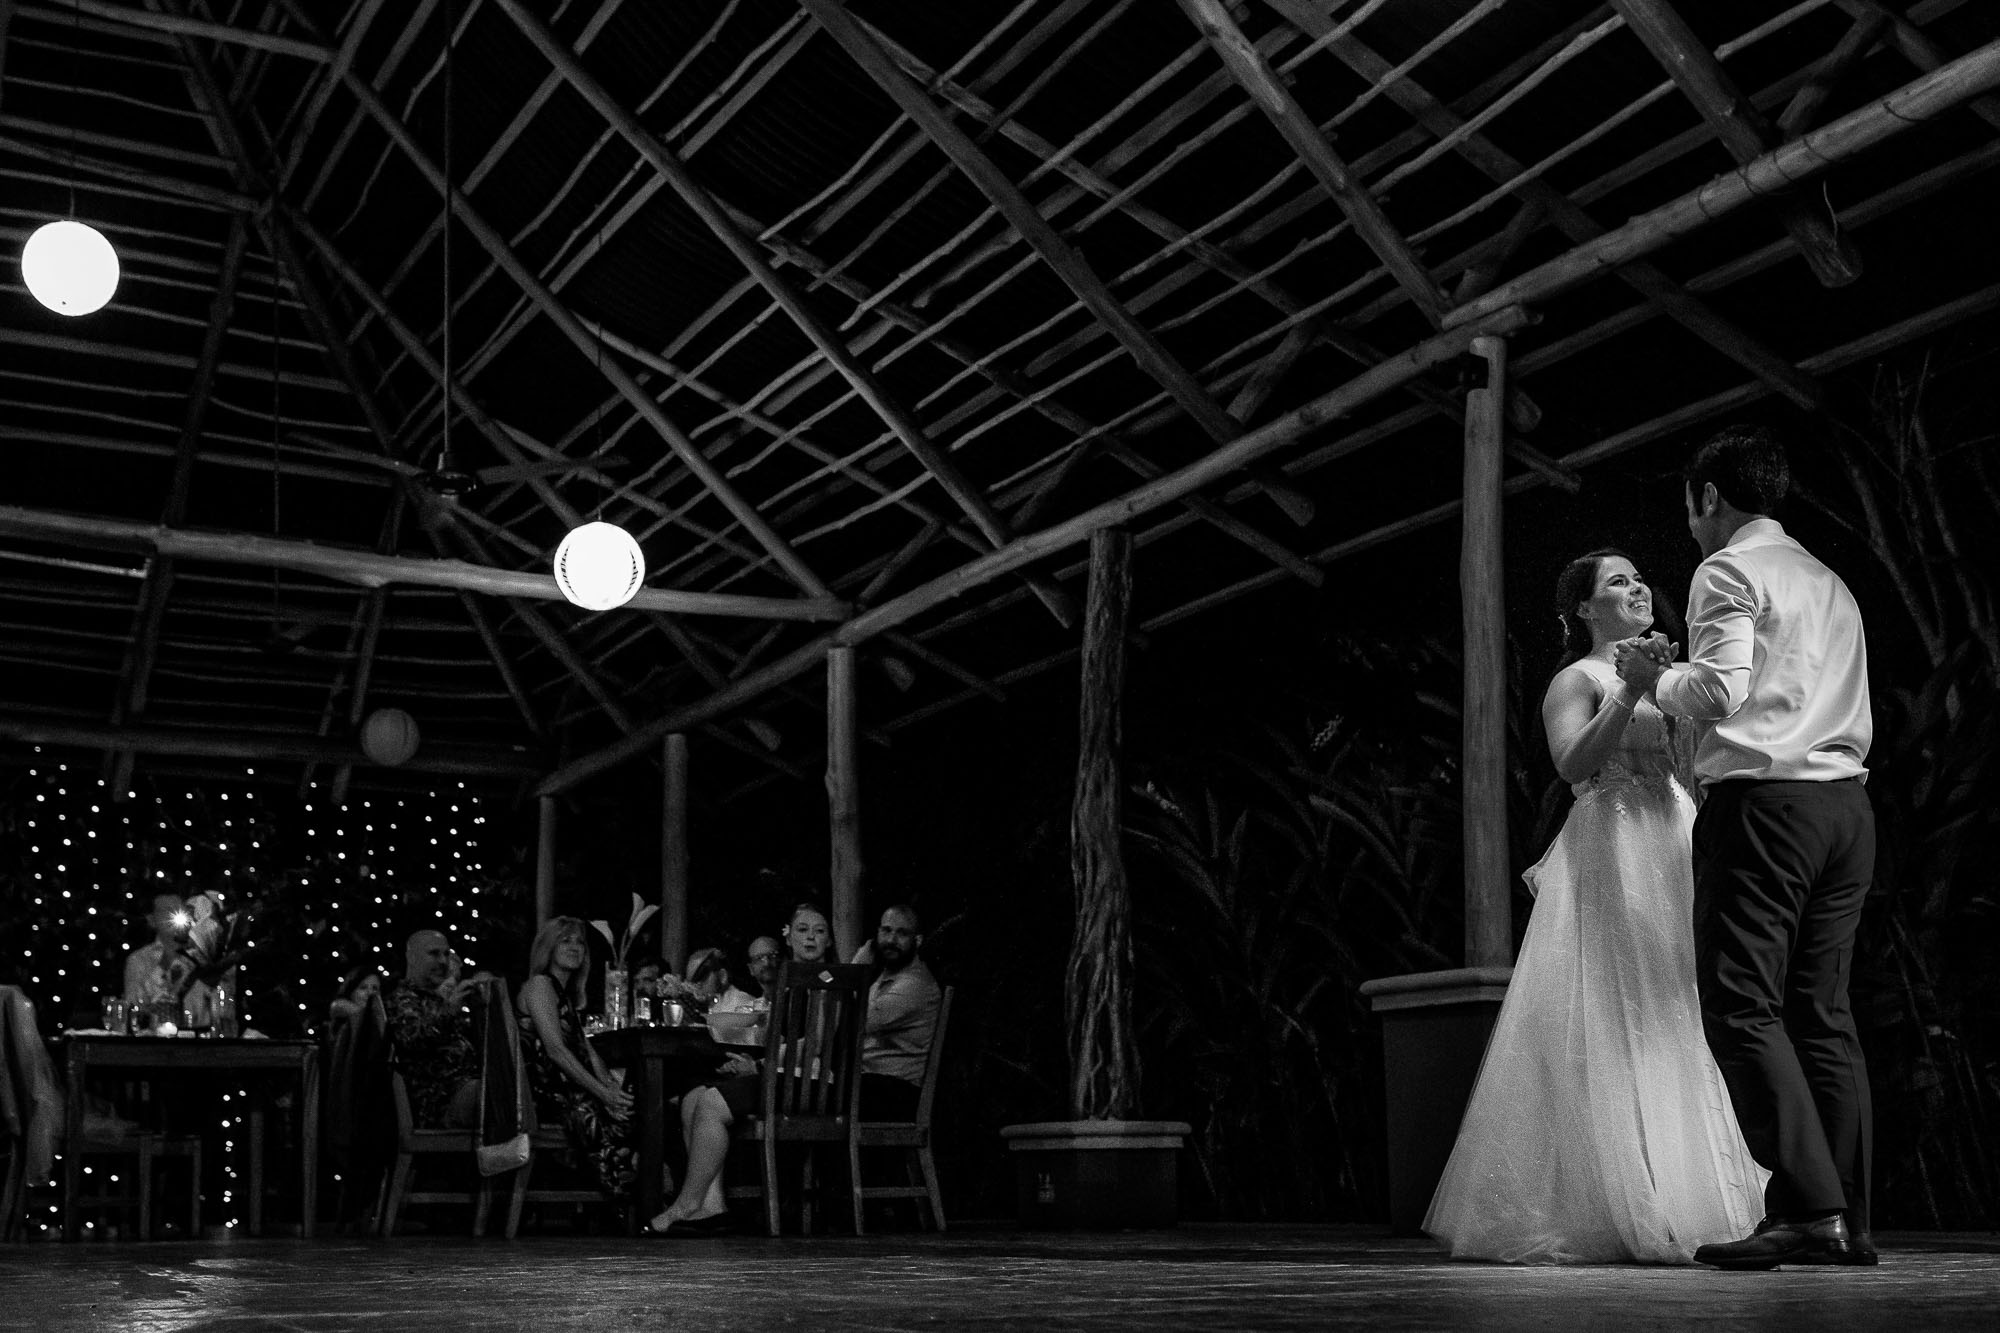 B&W of the bride and groom dancing at the reception